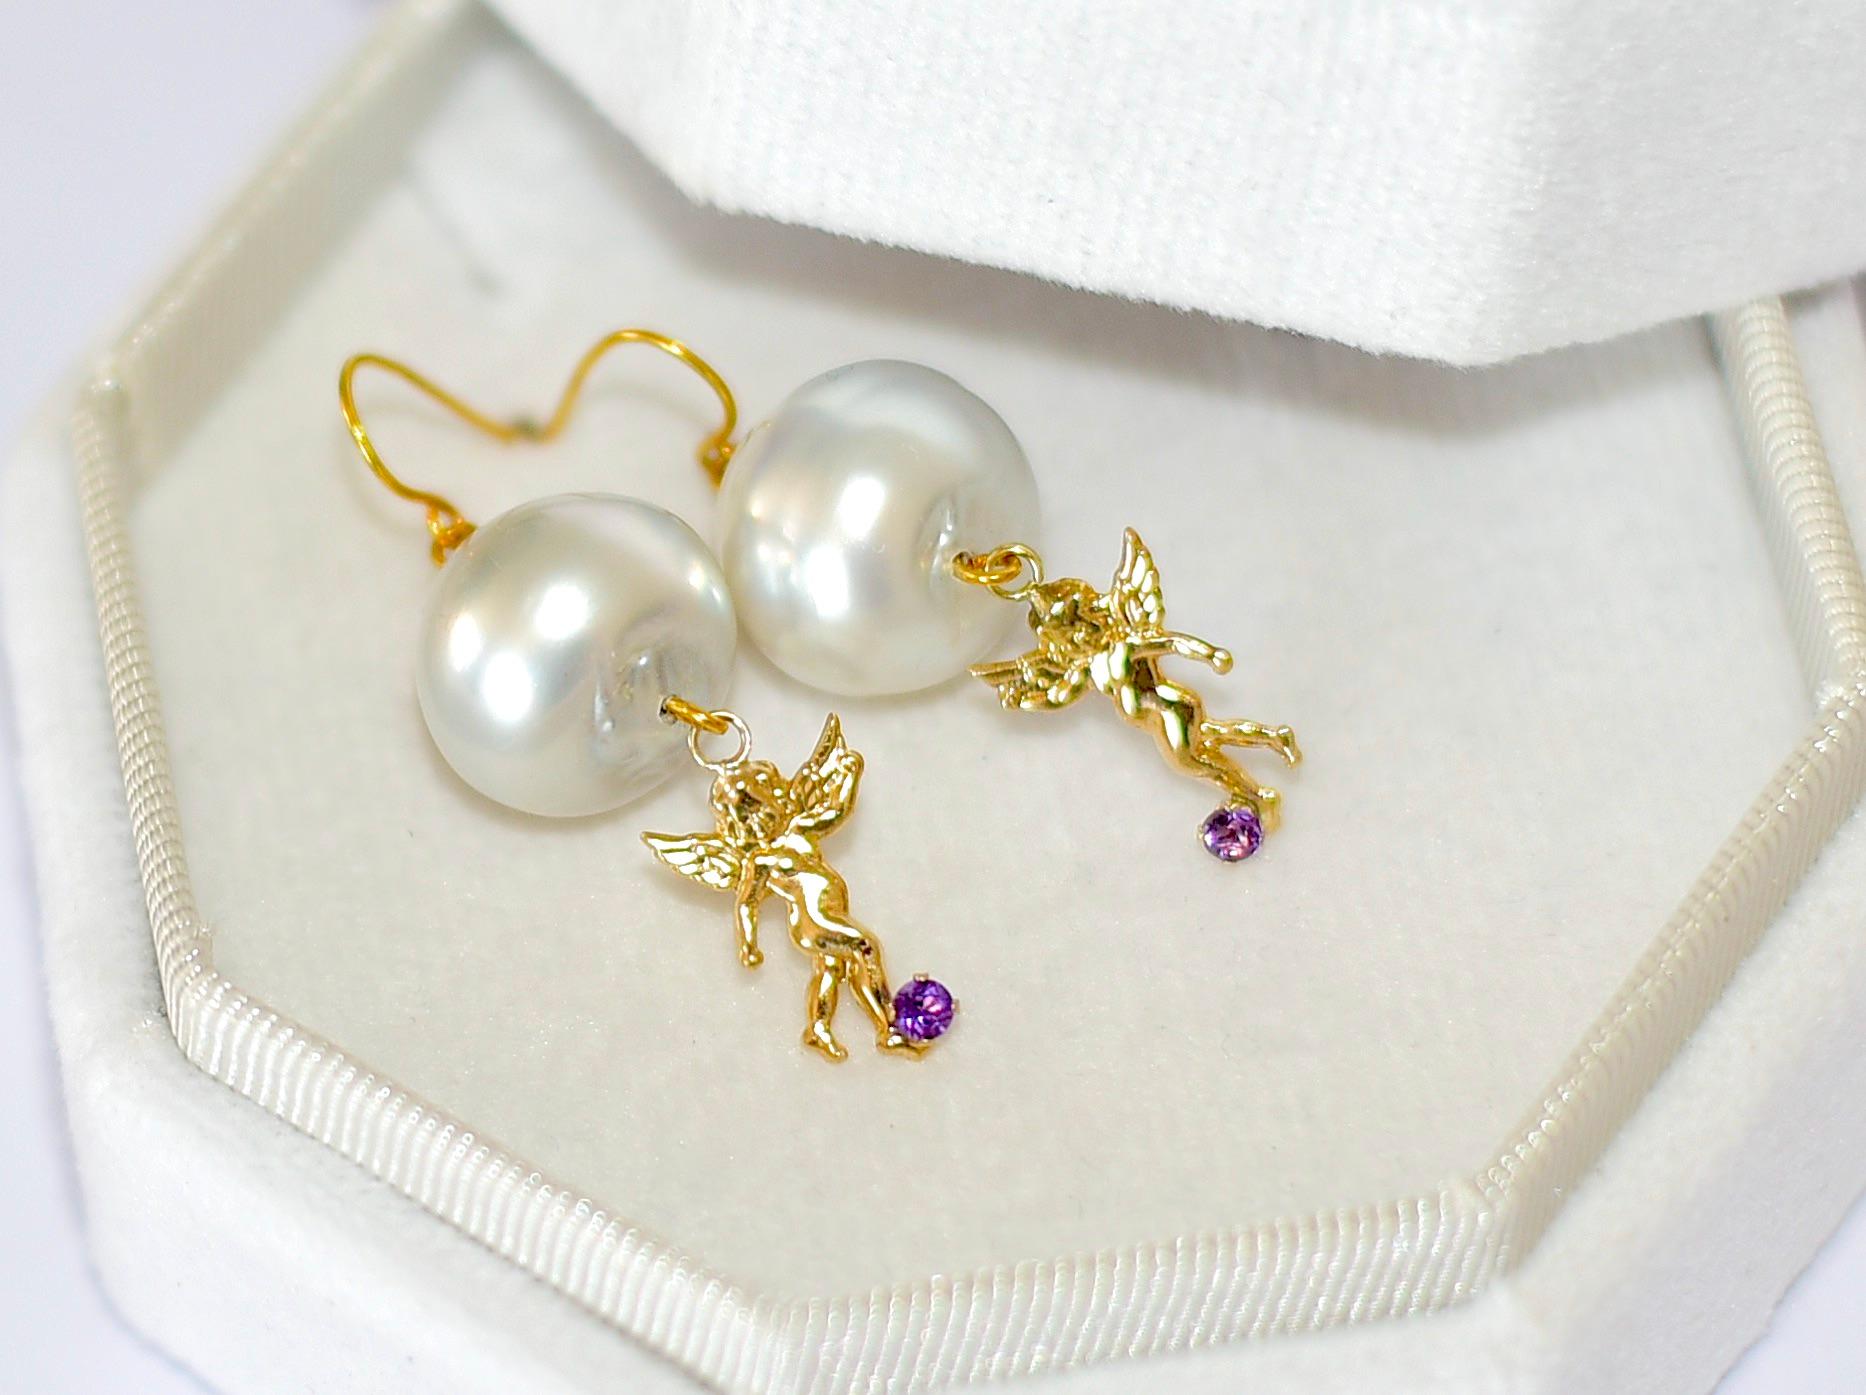 Round Cut Australian Paspaley Cultured Pearl earrings, 14K Yellow Gold Angel with Amethyst